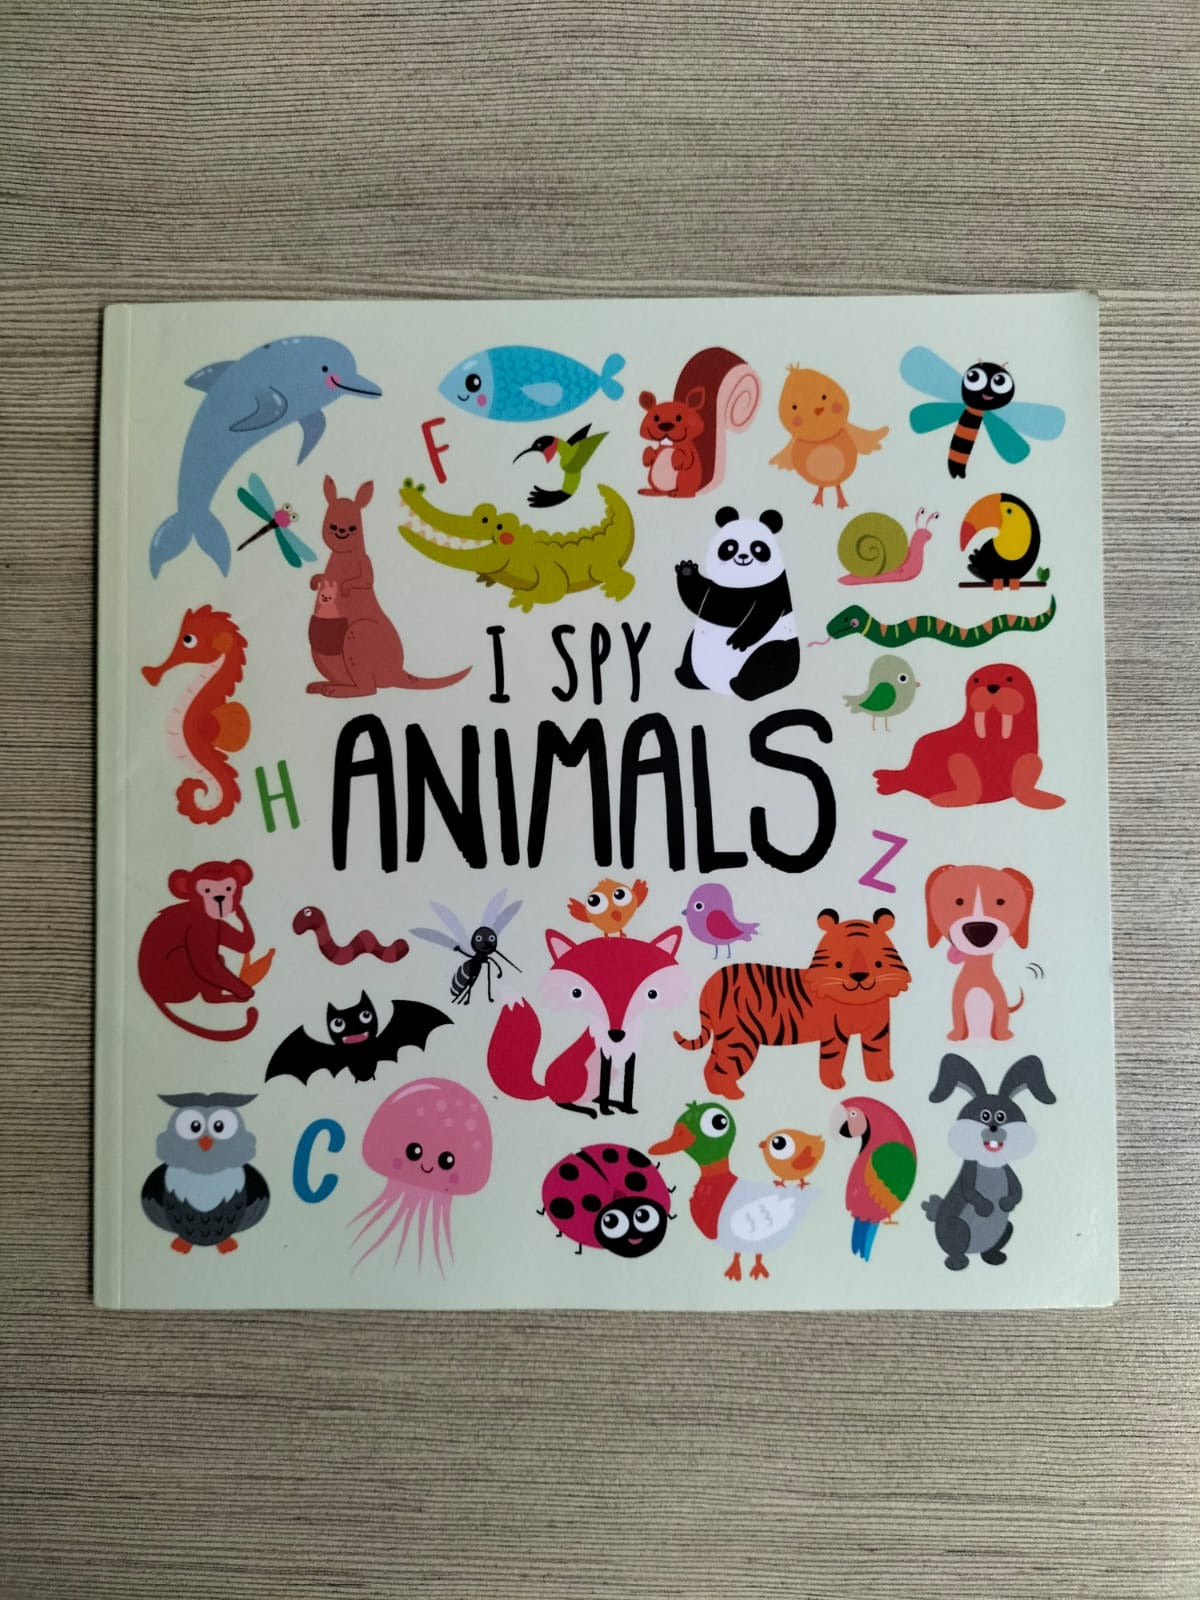 I spy animals children's pre-loved used books available at Chapters in Pakistan